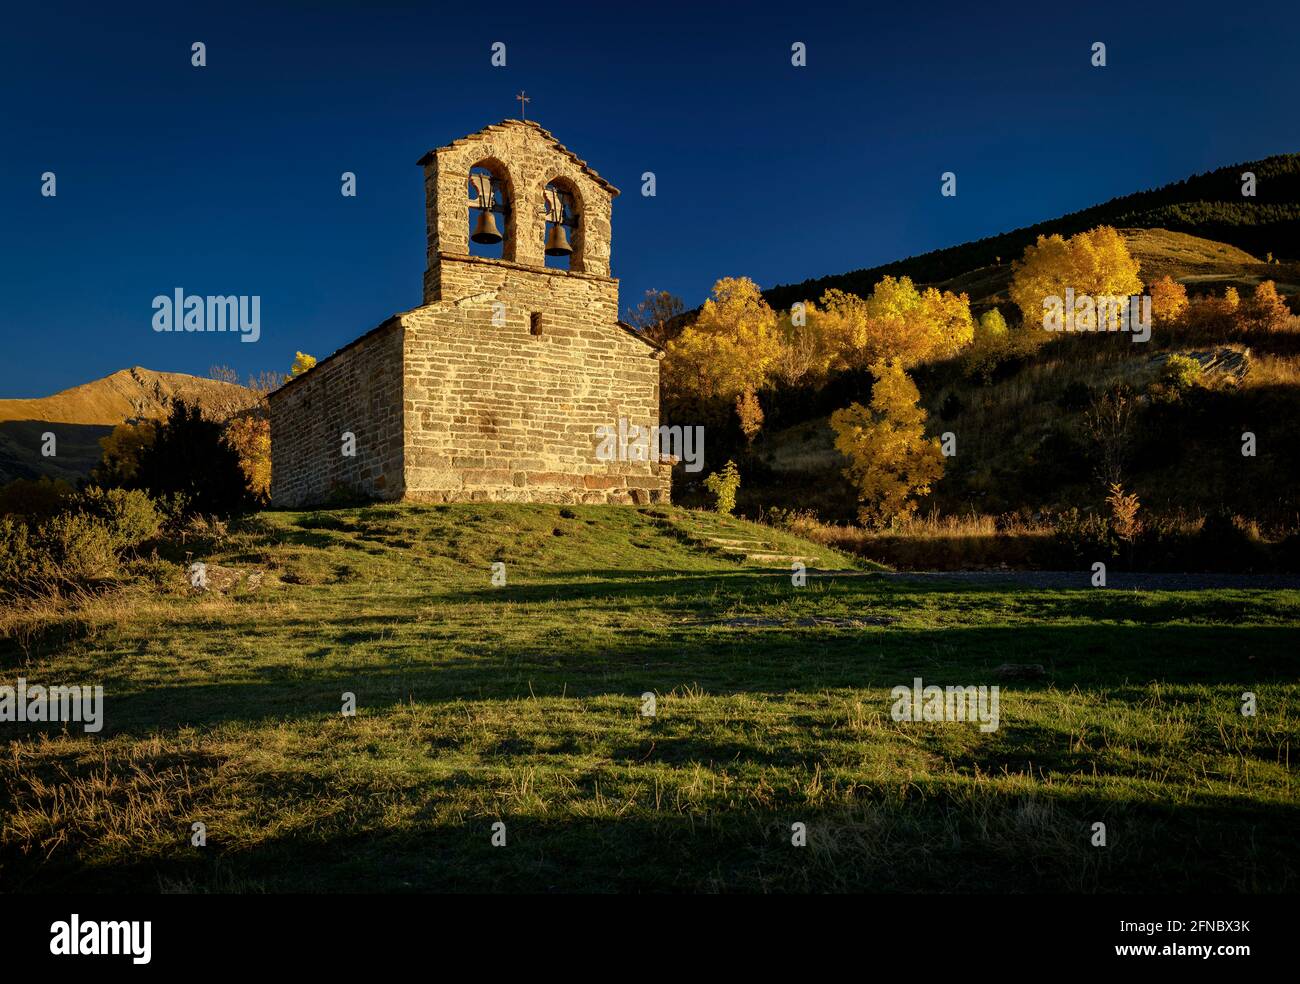 Sant Quirc de Durro Hermitage in an autumn sunset (Boí Valley, Catalonia, Spain, Pyrenees) ESP: Ermita de Sant Quirc de Durro en un atardecer otoñal Stock Photo